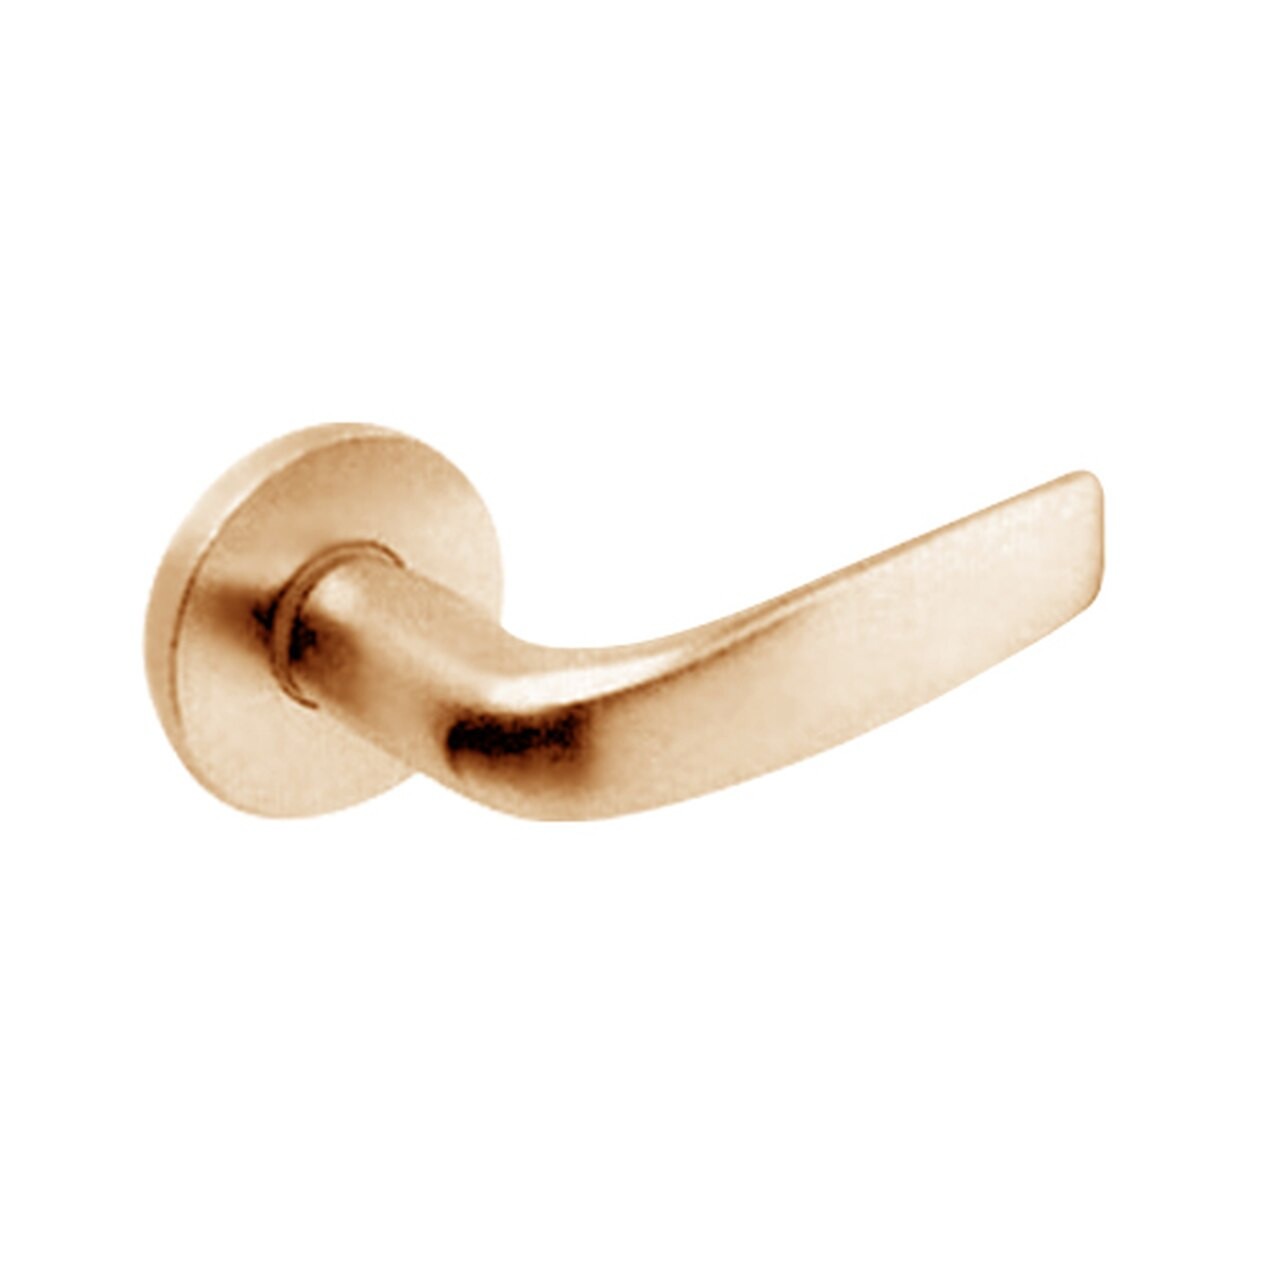 ML2048-CSB-612-M31 Corbin Russwin ML2000 Series Mortise Entrance Trim Pack with Citation Lever in Satin Bronze